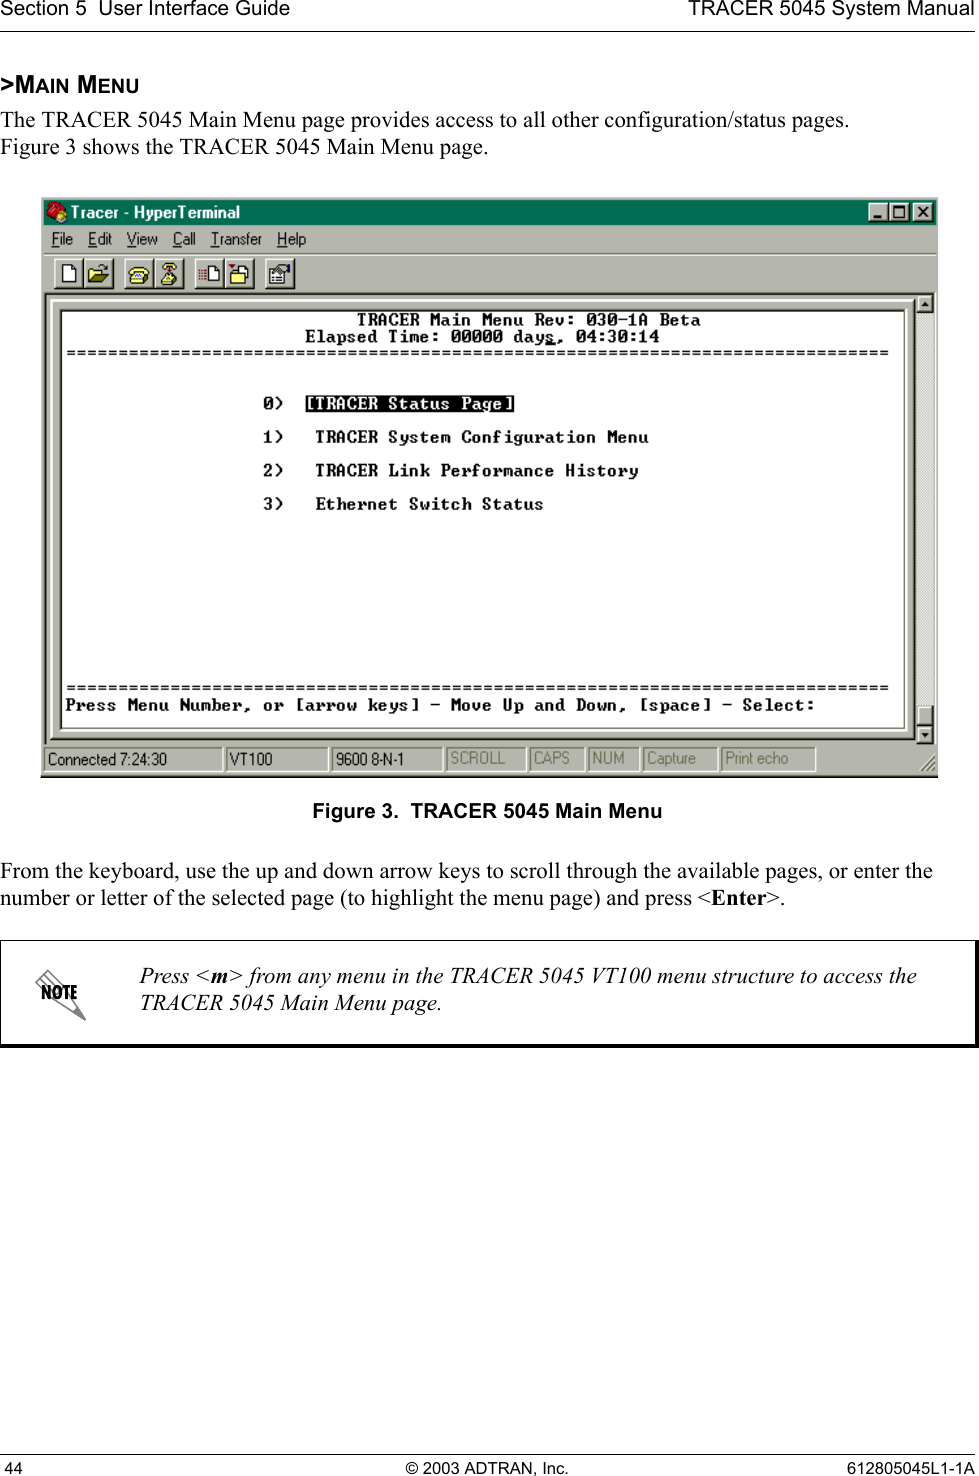 Section 5  User Interface Guide TRACER 5045 System Manual 44 © 2003 ADTRAN, Inc. 612805045L1-1A&gt;MAIN MENUThe TRACER 5045 Main Menu page provides access to all other configuration/status pages. Figure 3 shows the TRACER 5045 Main Menu page.Figure 3.  TRACER 5045 Main MenuFrom the keyboard, use the up and down arrow keys to scroll through the available pages, or enter the number or letter of the selected page (to highlight the menu page) and press &lt;Enter&gt;.Press &lt;m&gt; from any menu in the TRACER 5045 VT100 menu structure to access the TRACER 5045 Main Menu page.